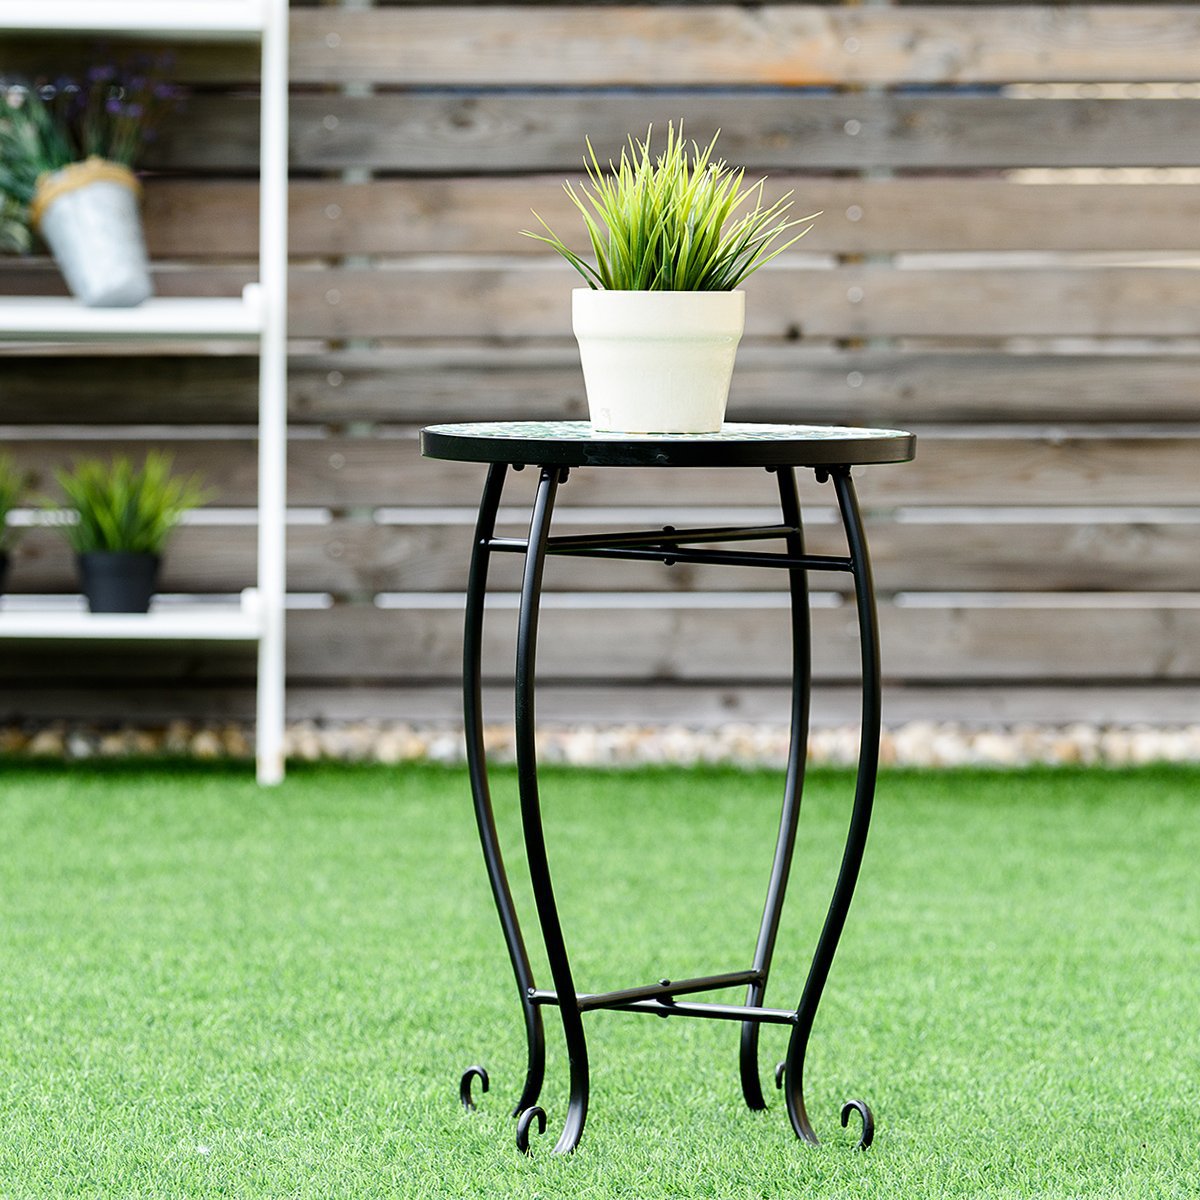 Accent Table Coffee Tables Decor Accent Side End Tables Plant Stand Chair for Bedroom, Living Room, Home Office and Patio - image 3 of 11